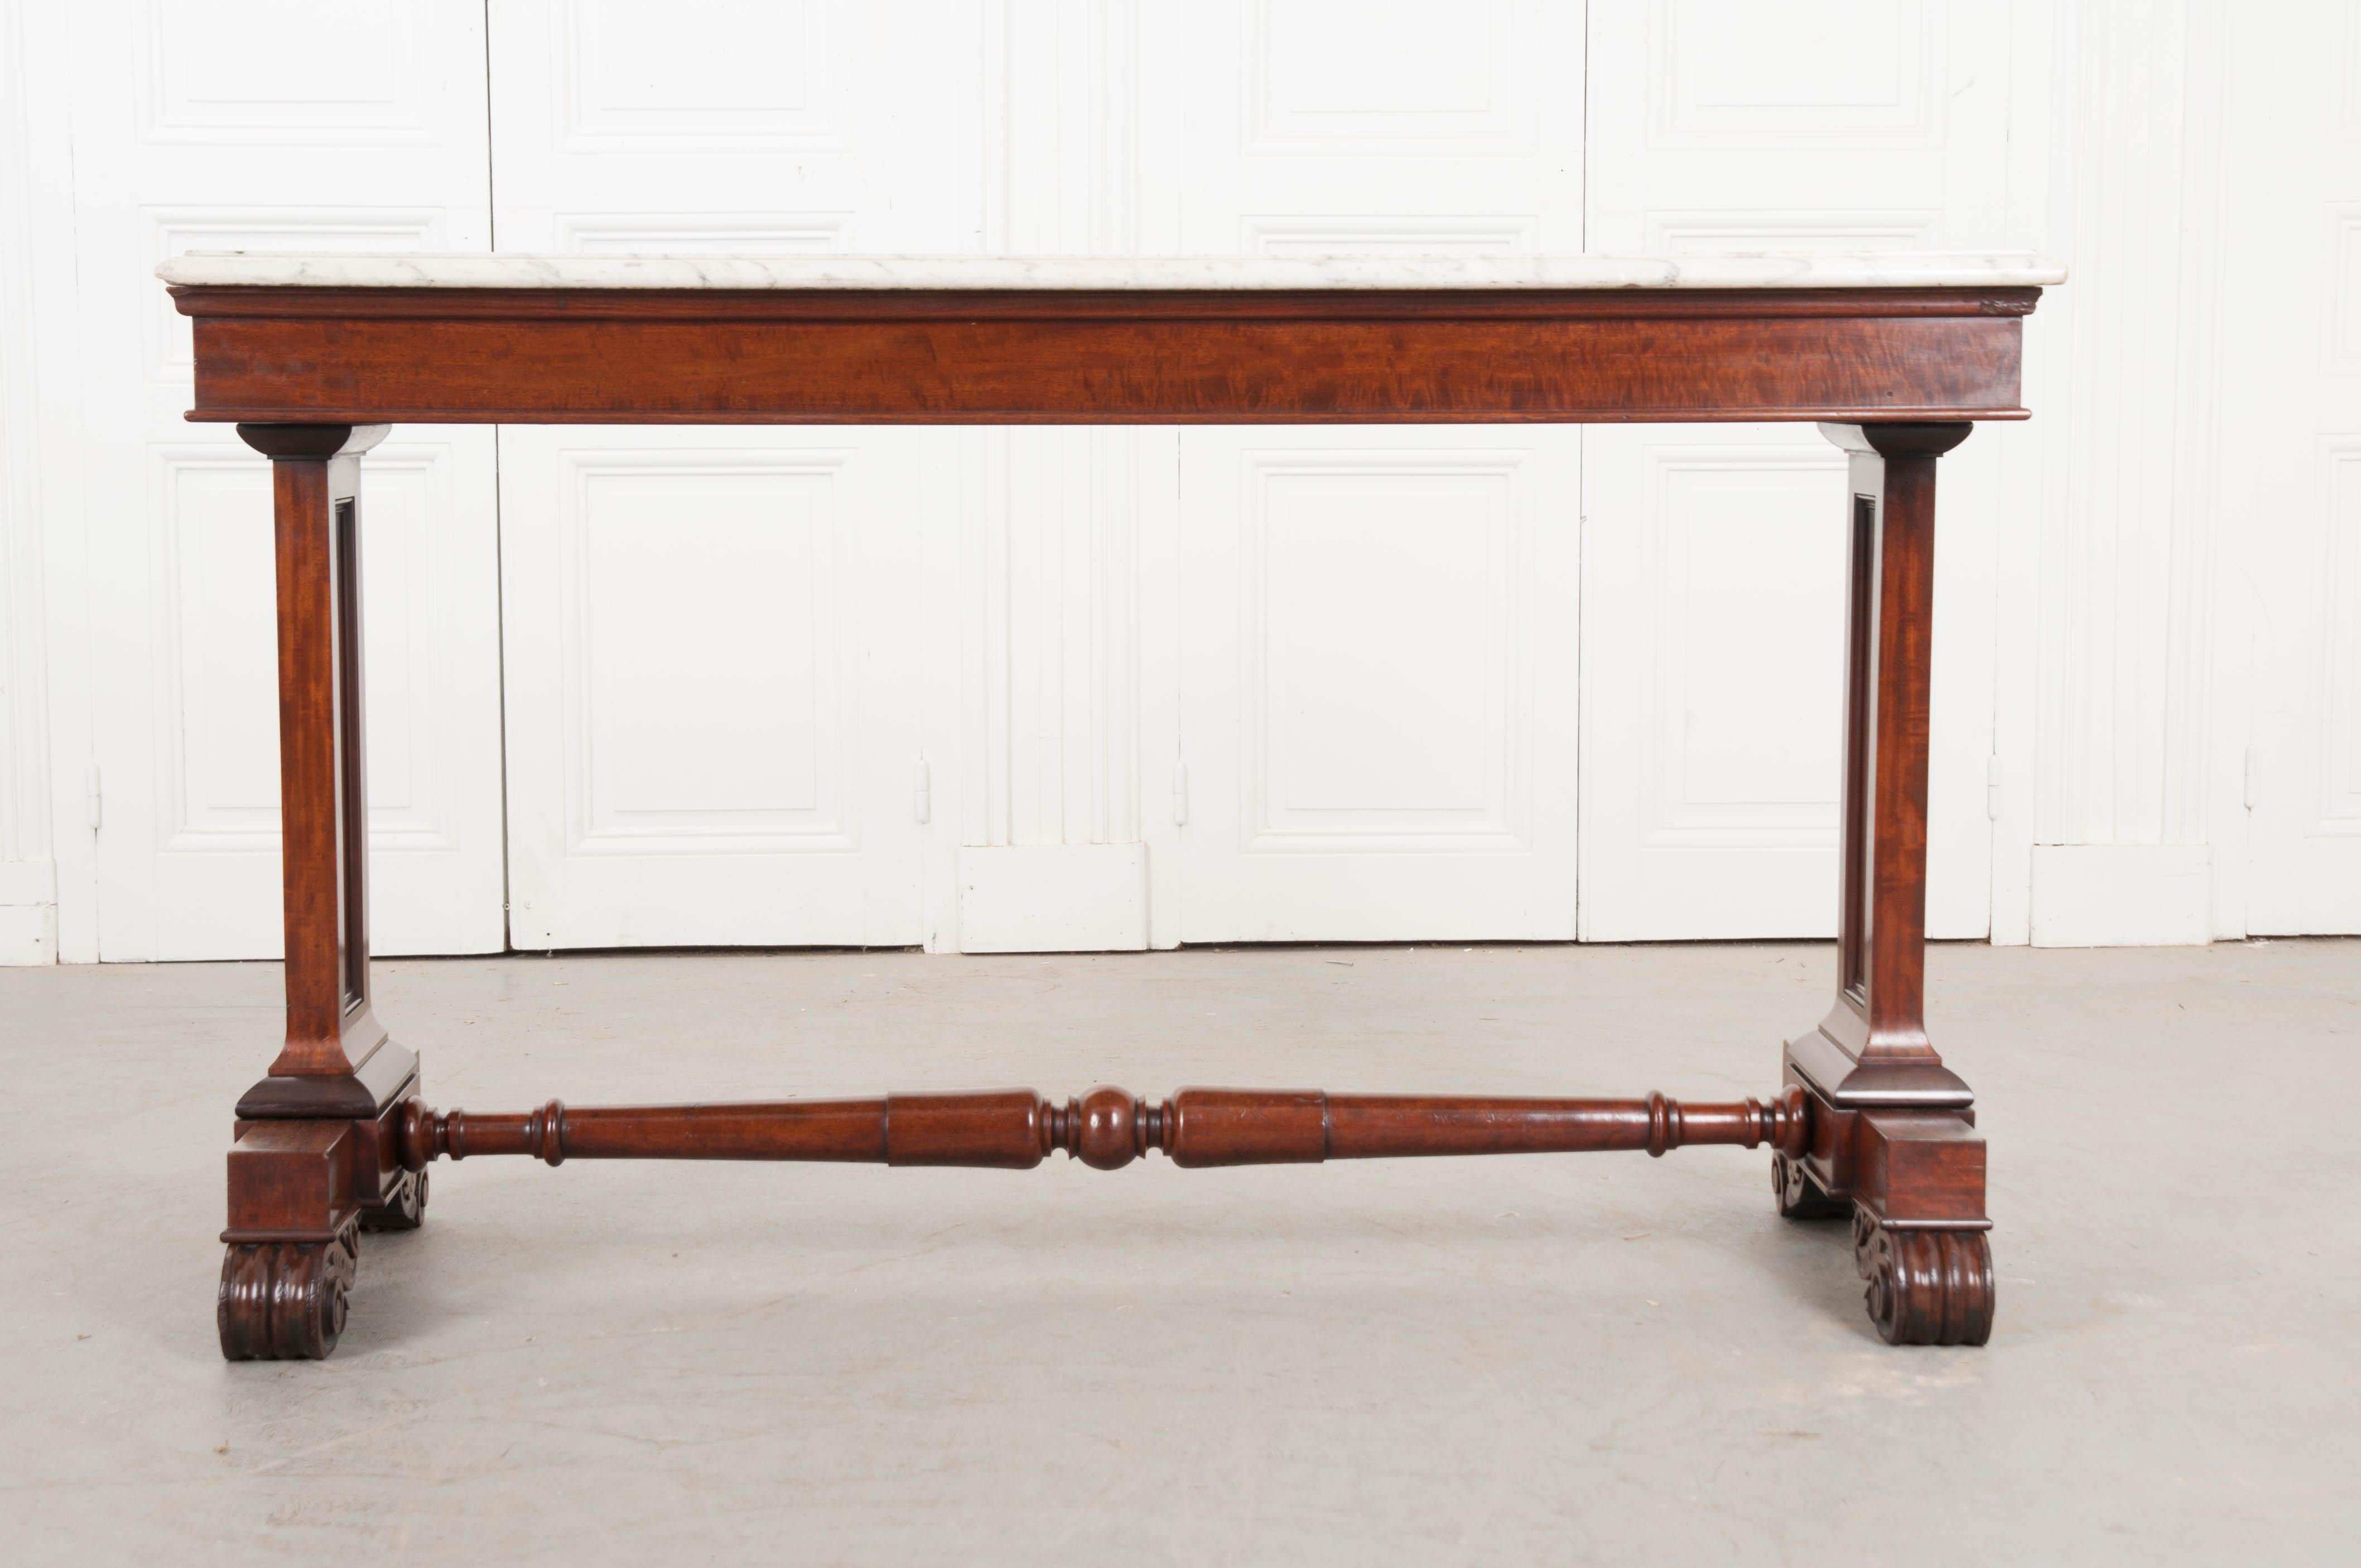 A handsome 19th century Regency style console hall table with marble top from England. The white marble top is in good antique condition with an inverted ogee edge, finished on three sides. The large marble top rests on an apron that is lifted by